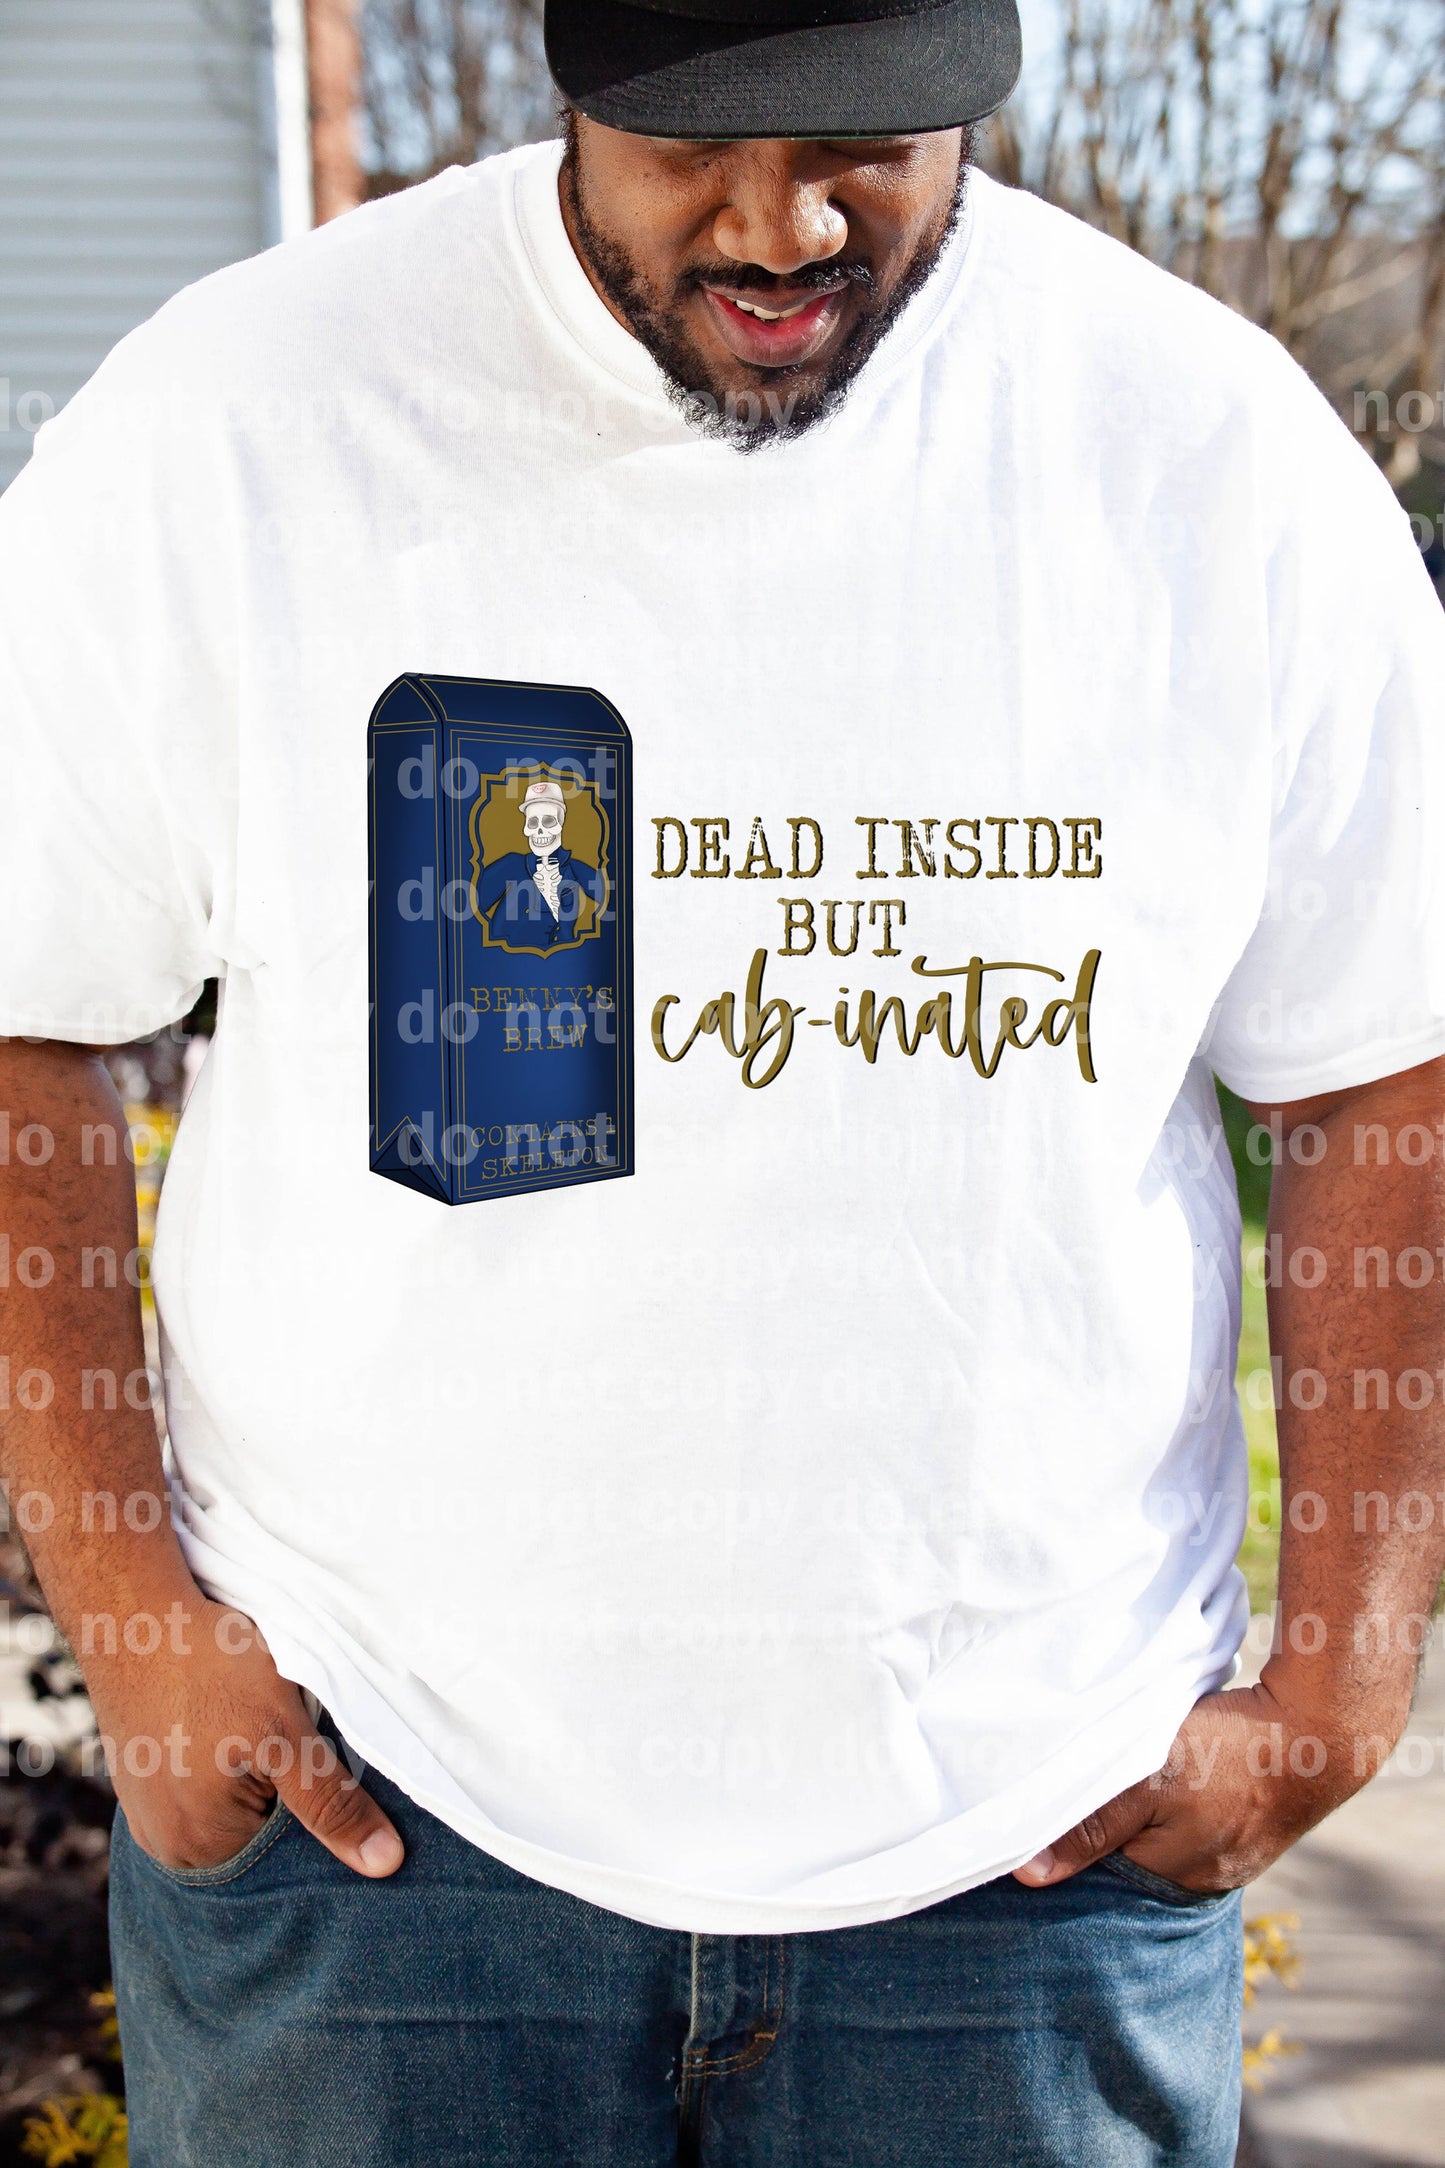 Dead Inside But Cabinated Dream Print or Sublimation Print